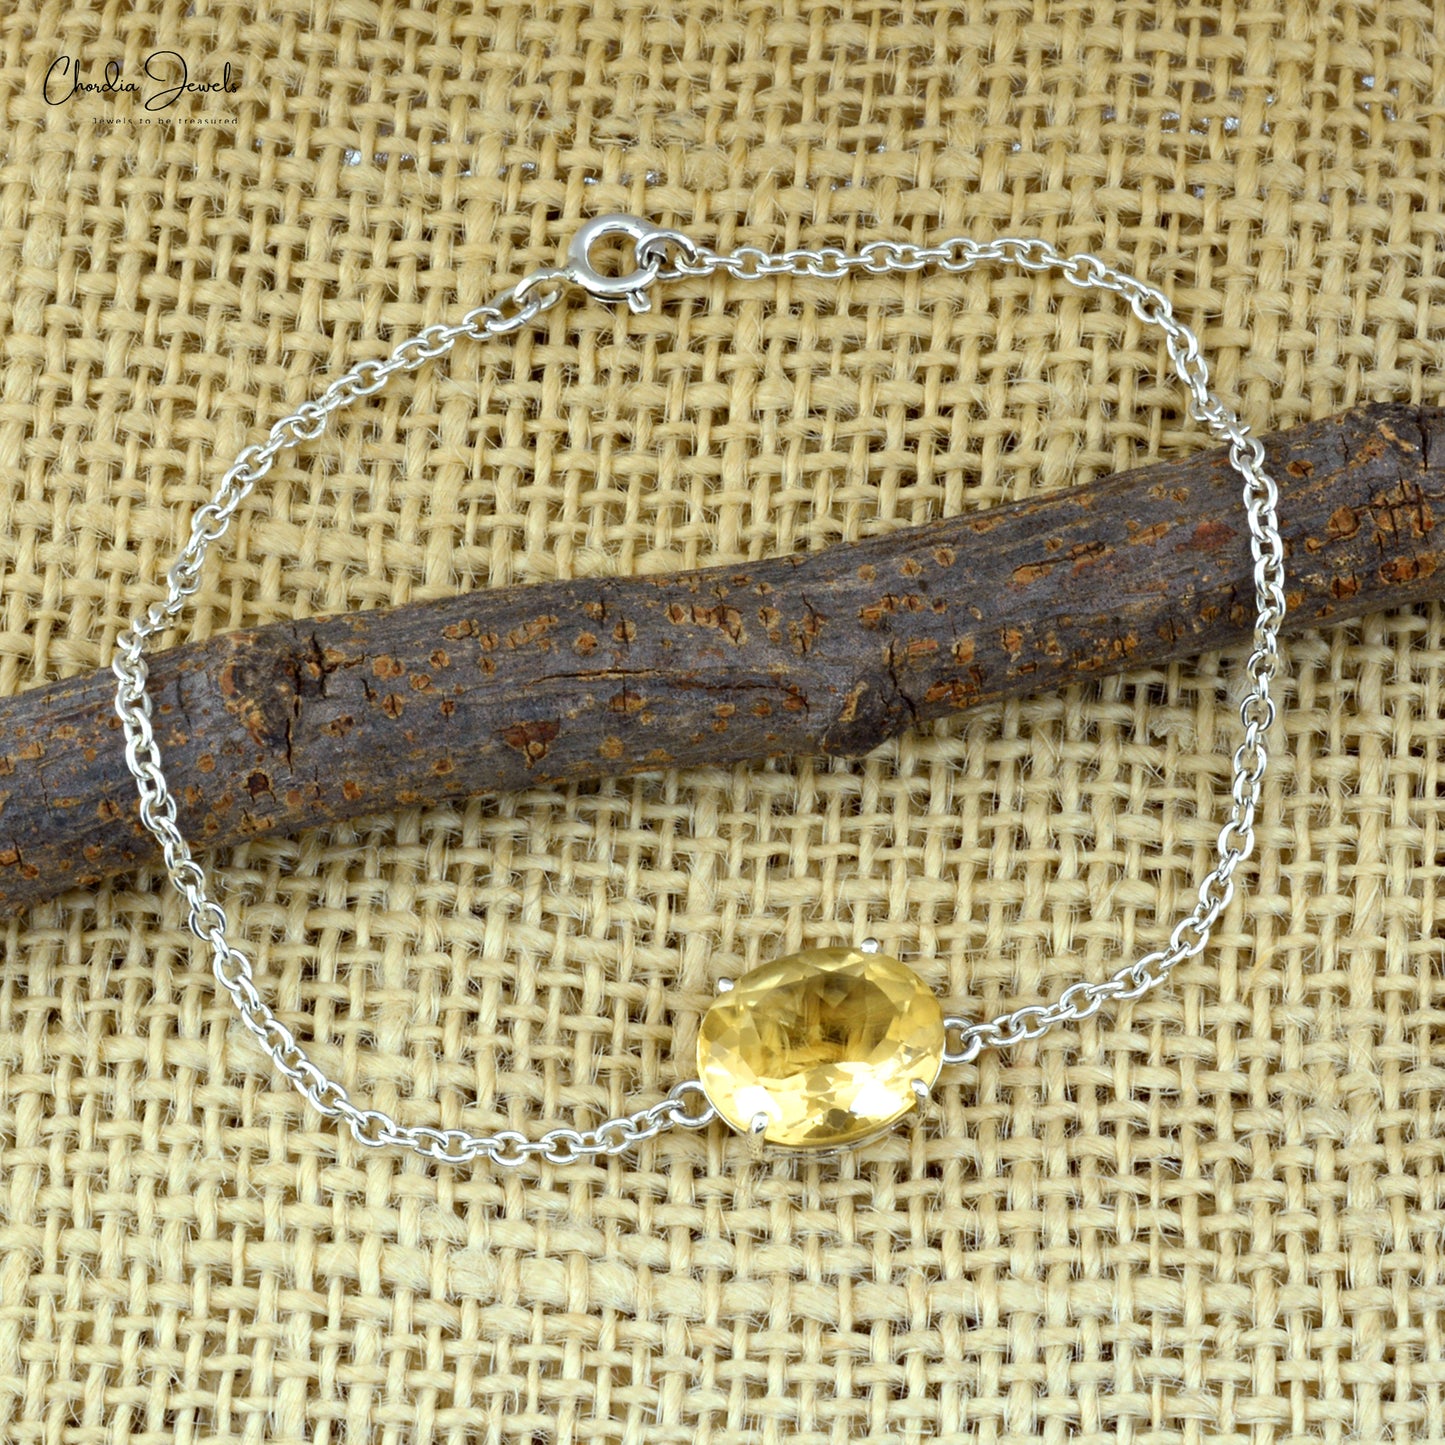 Hot Selling 925 Sterling Silver Chain Bracelet With Natural Citrine Gemstone Jewelry At Affordable Price